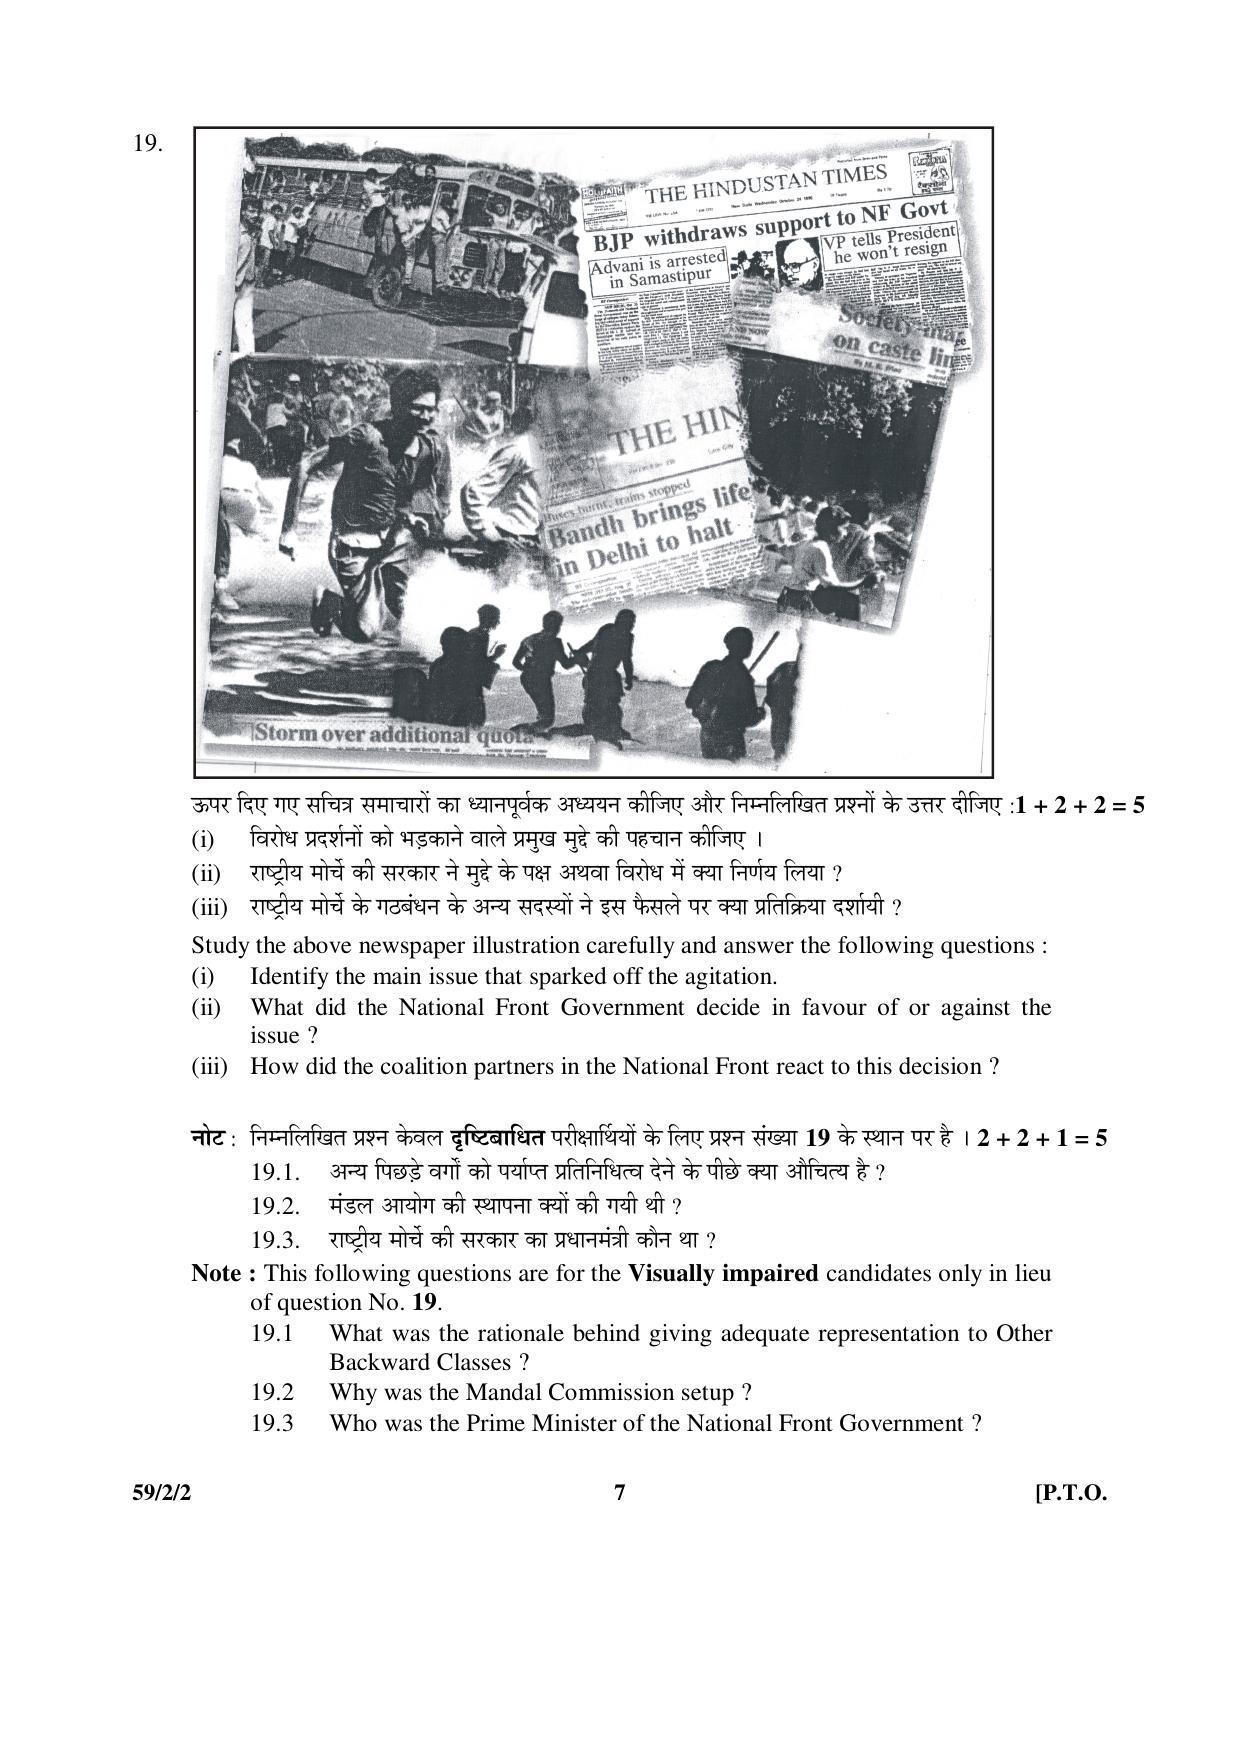 CBSE Class 12 59-2-2 _Political Science 2016 Question Paper - Page 7